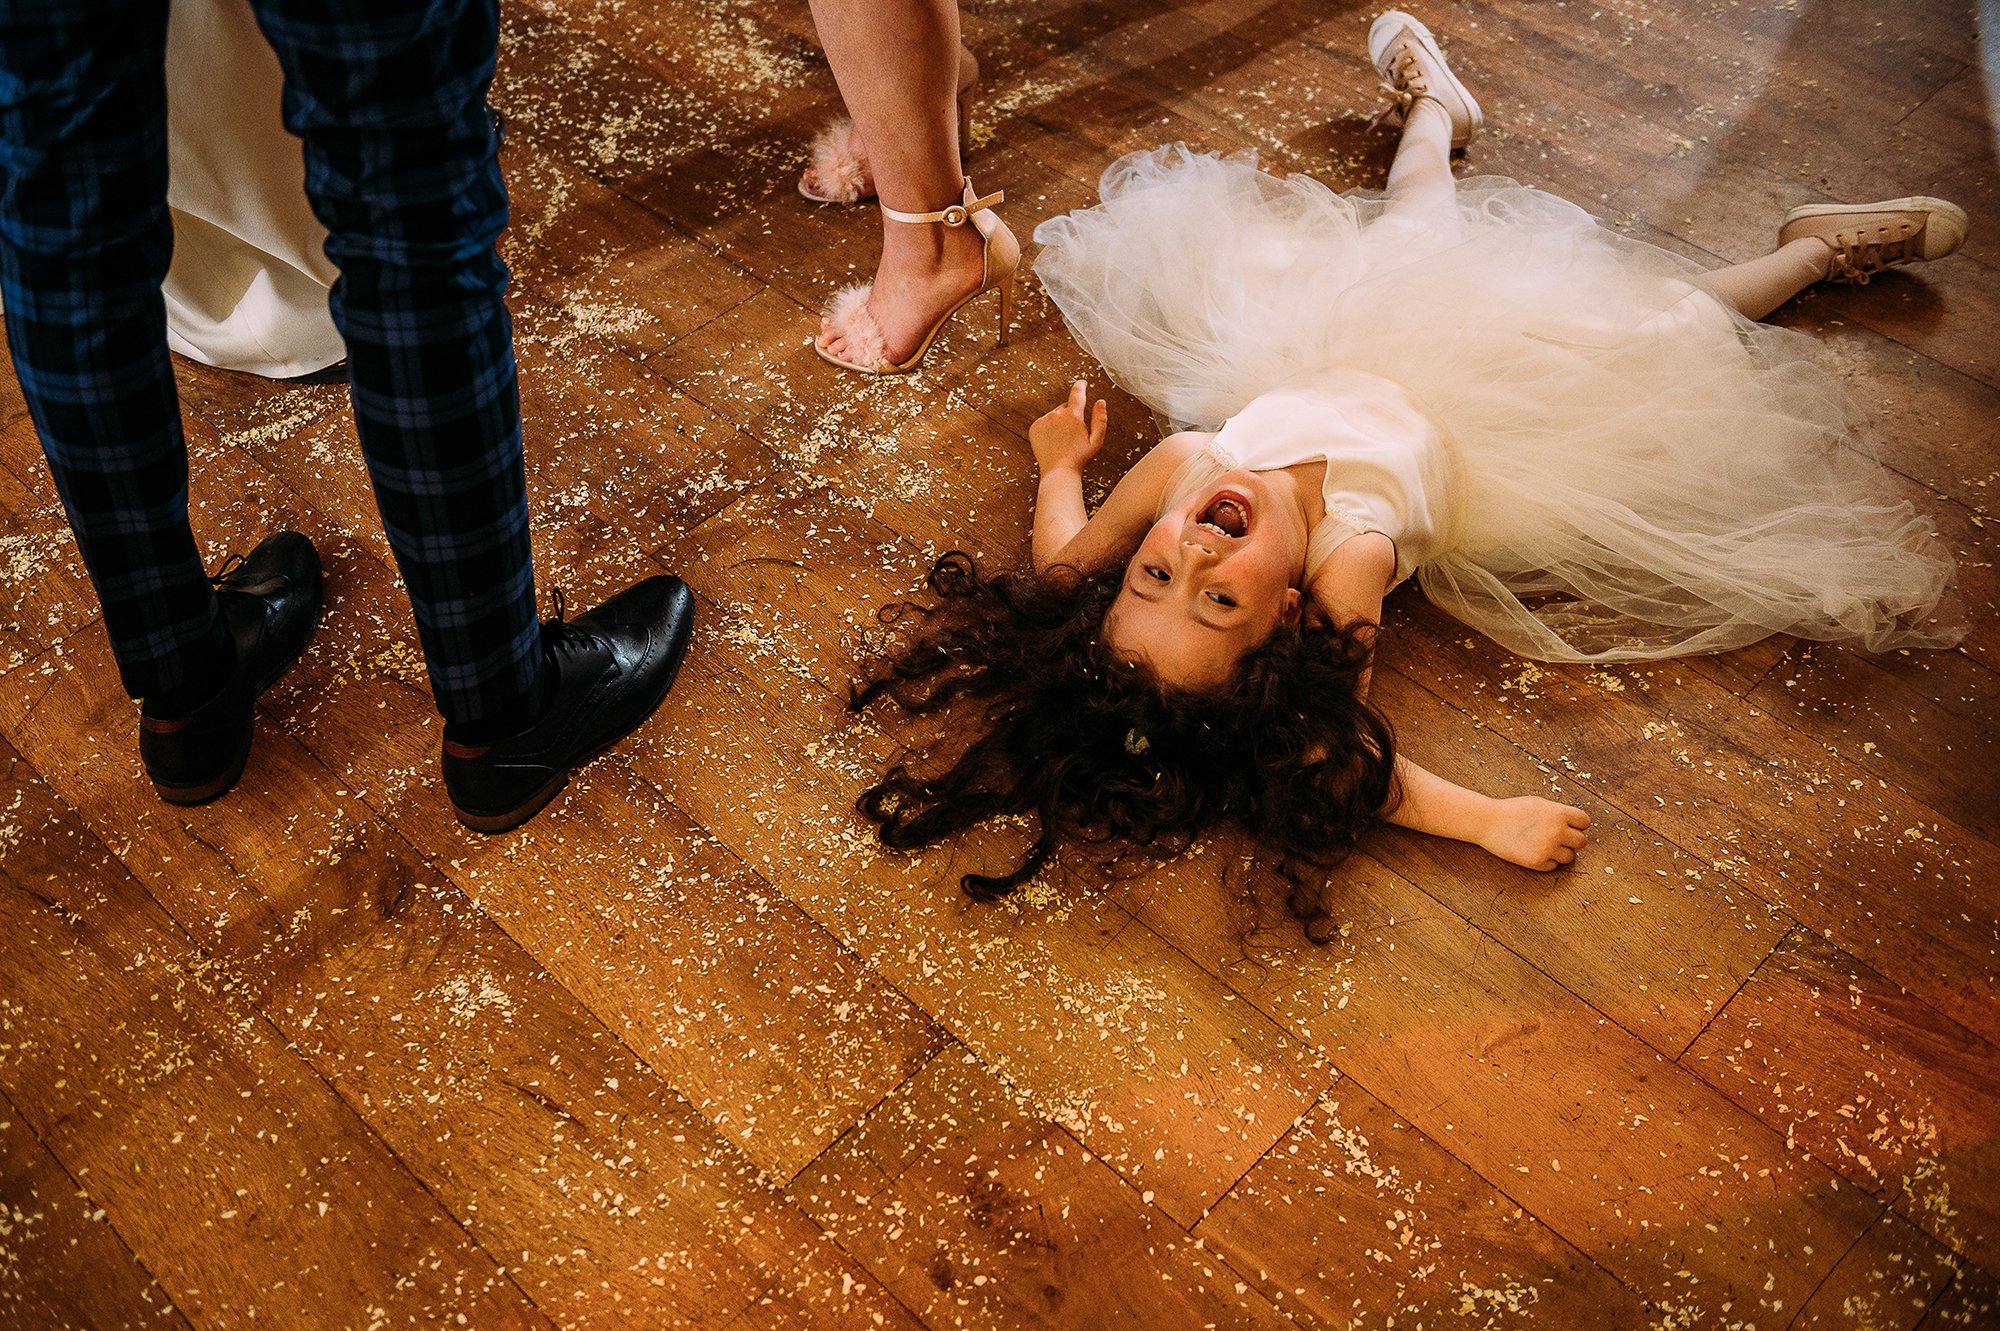  Flower girl doing a ‘snow angel’ in confetti on the floor. 